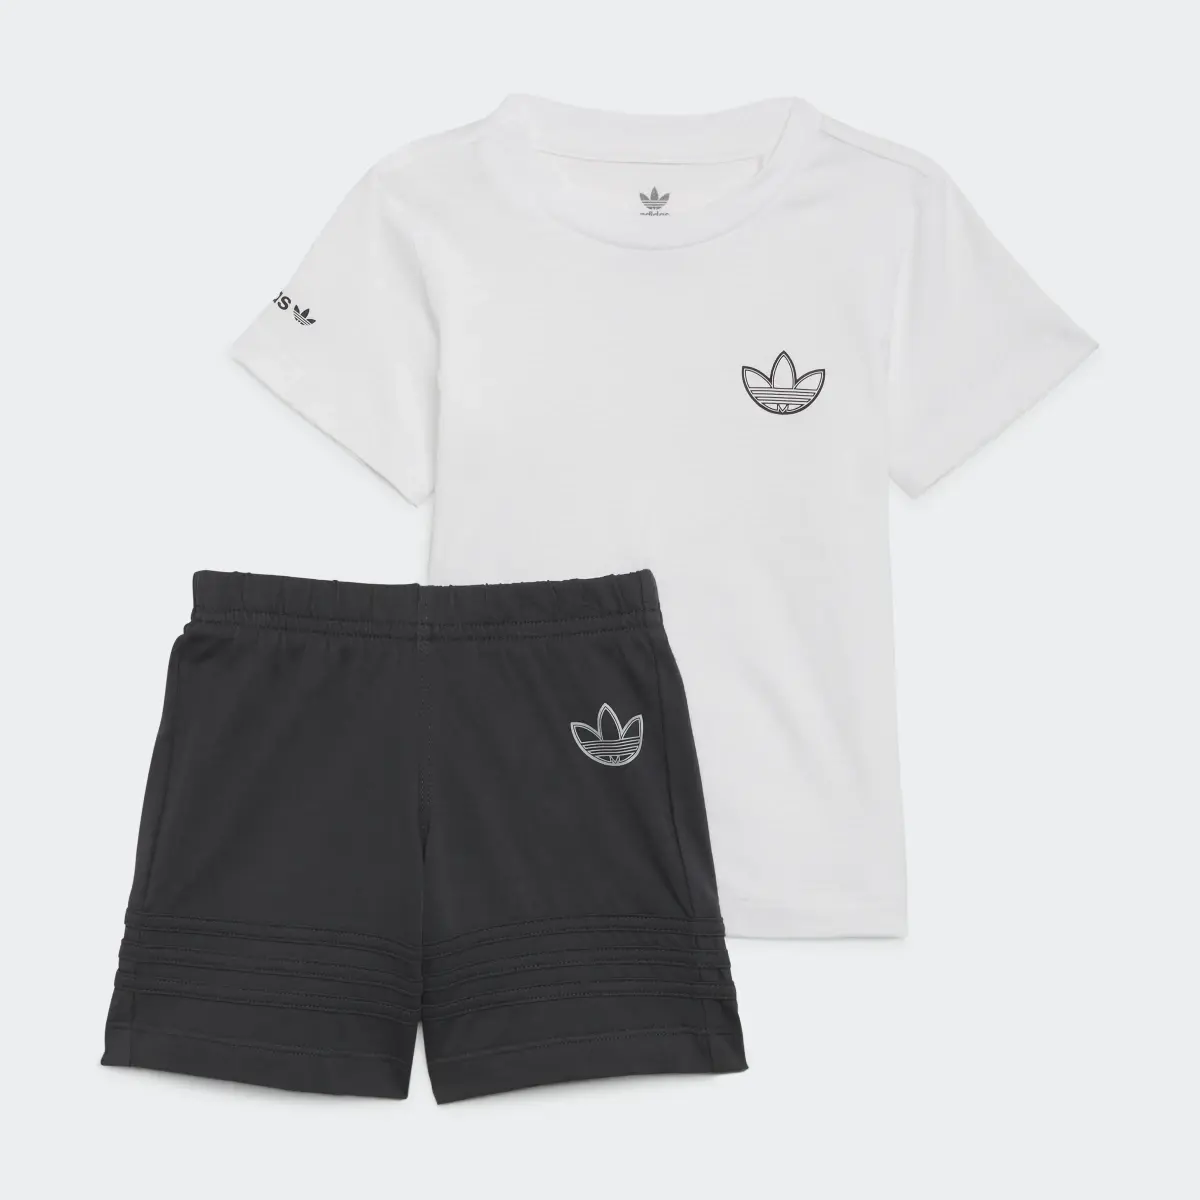 Adidas SPRT Collection Shorts and Tee Set. 2